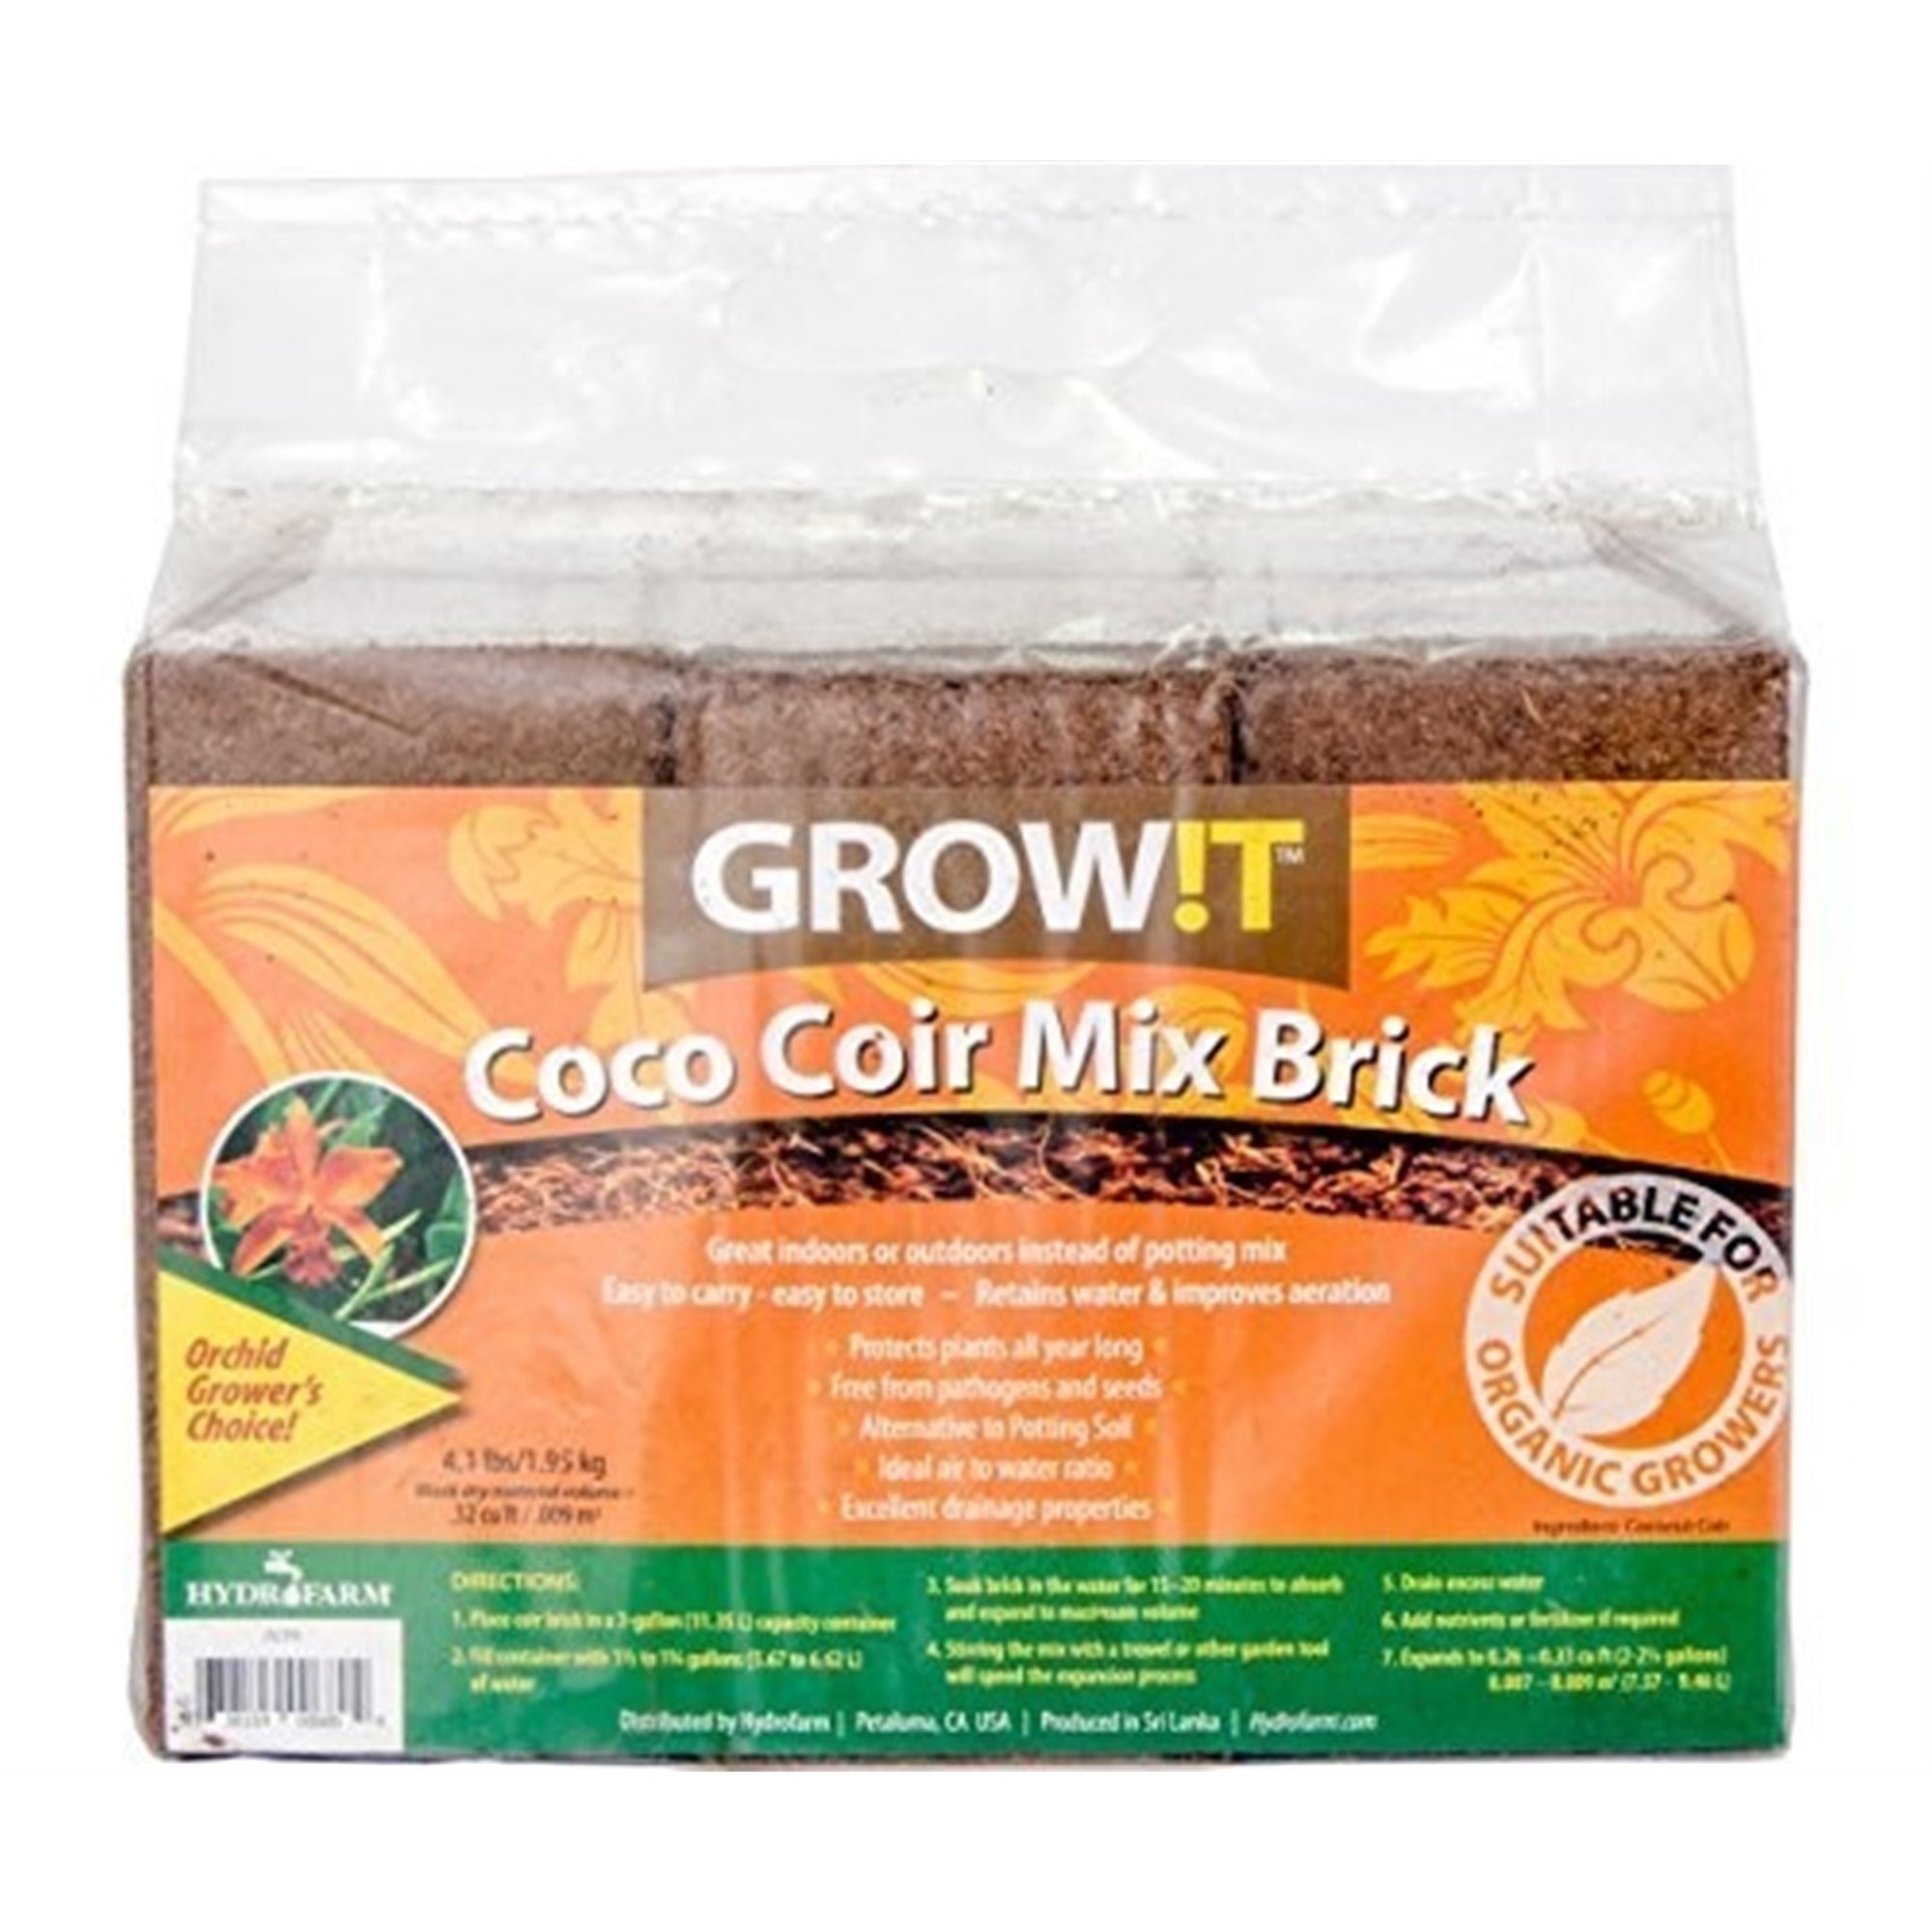 GROW!T - Coco Coir Mix Brick , Pack of 3